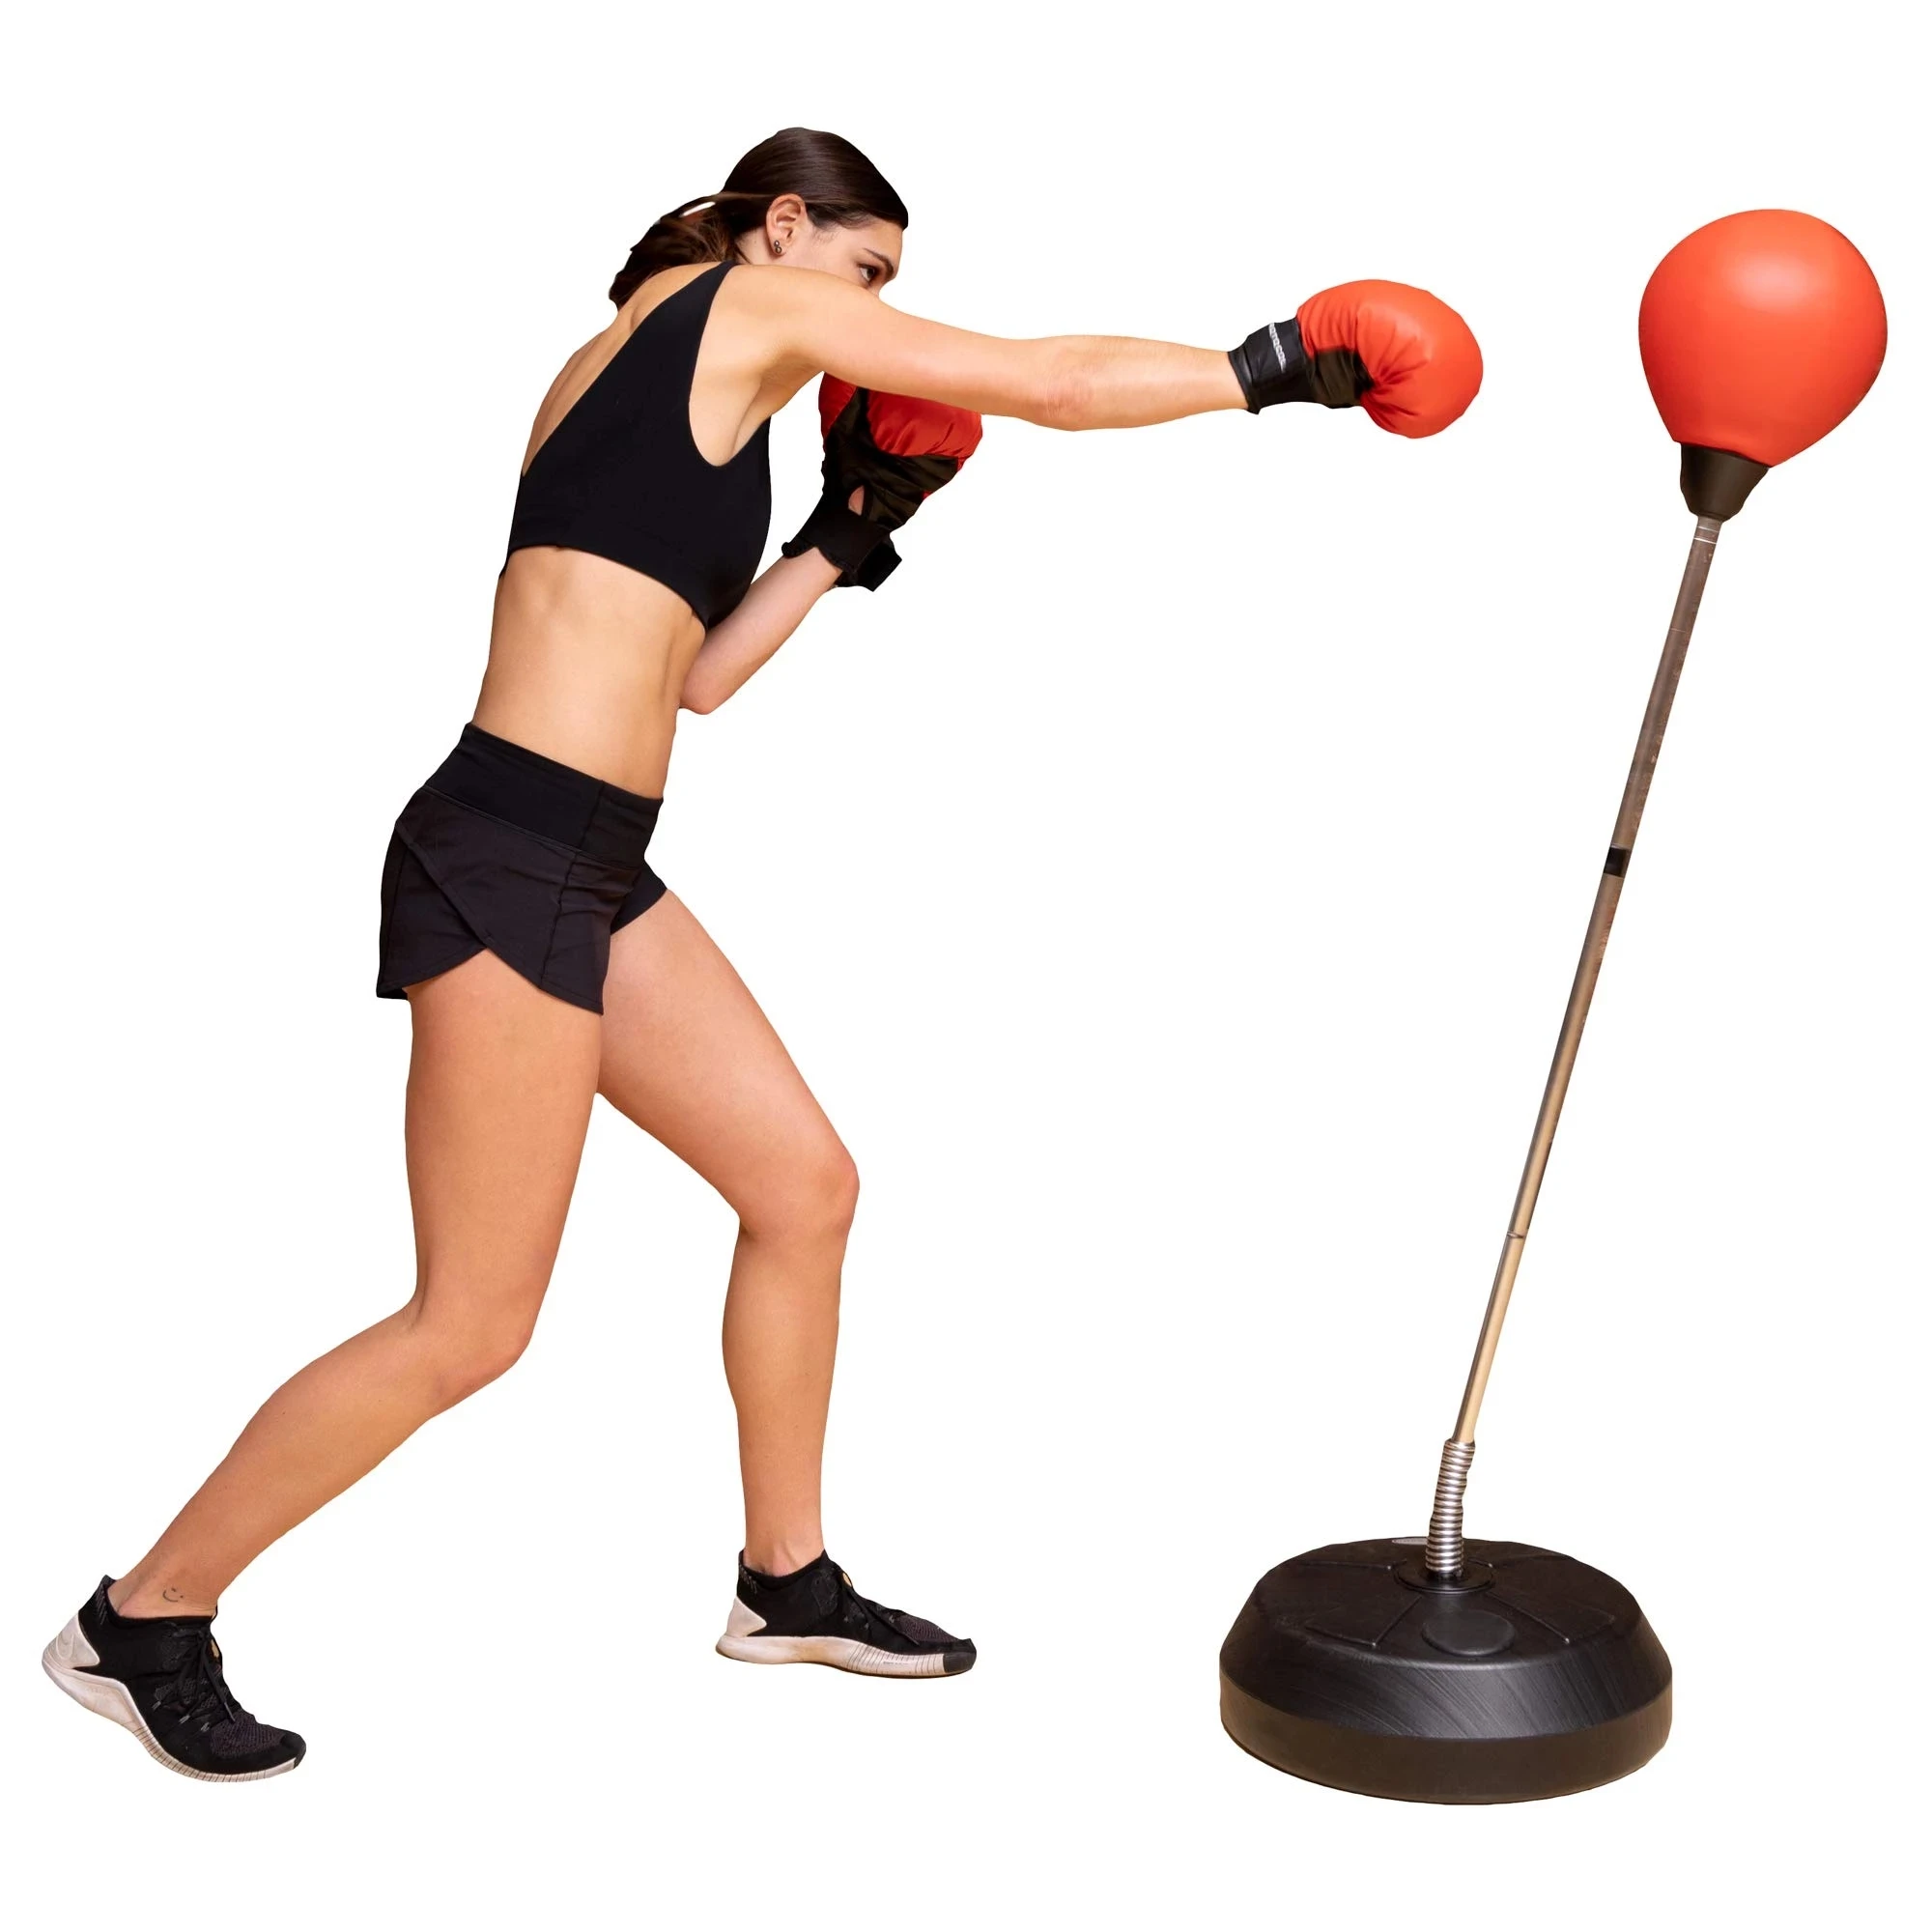 

Punching Ball Boxing Bag Reflex Speed Balls Muay Thai Punch Boxe MMA Fitness Sports Equipment Training Adjustable Height Stand